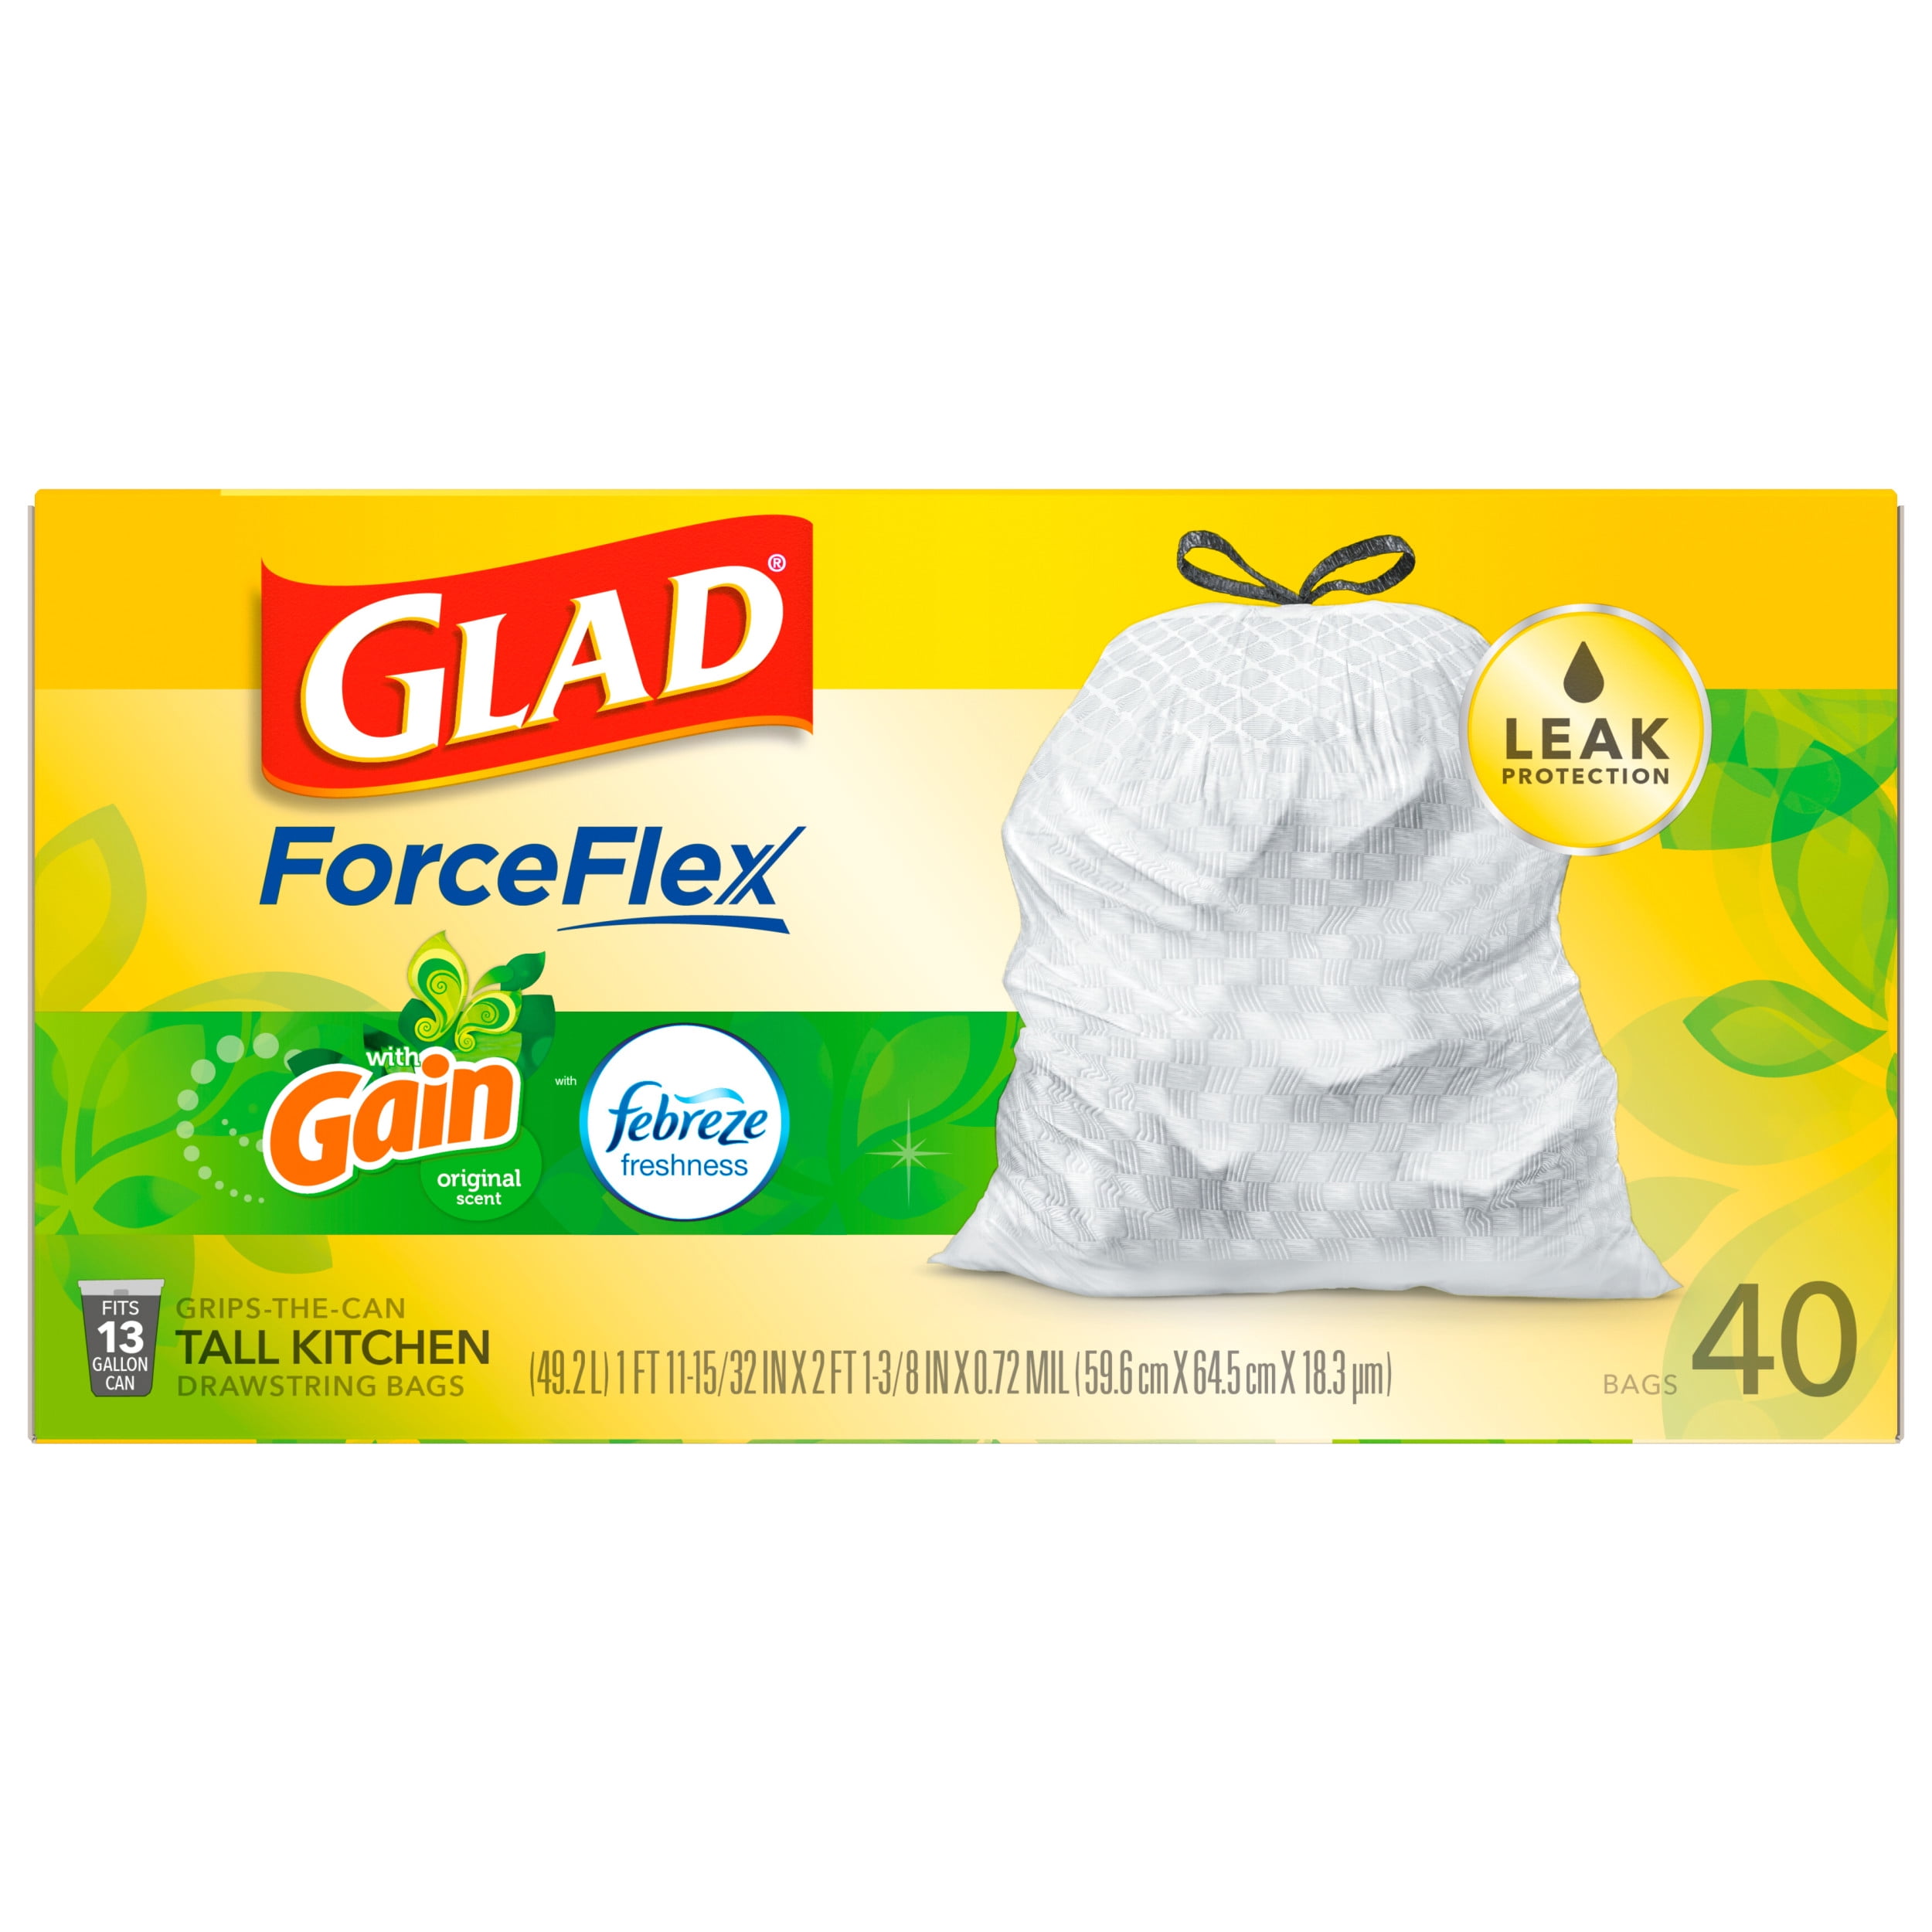 ForceFlex 13 gal. Tall Kitchen Drawstring Gain Original with Febreze Freshness Trash Bags (40-Count, 3-Pack)